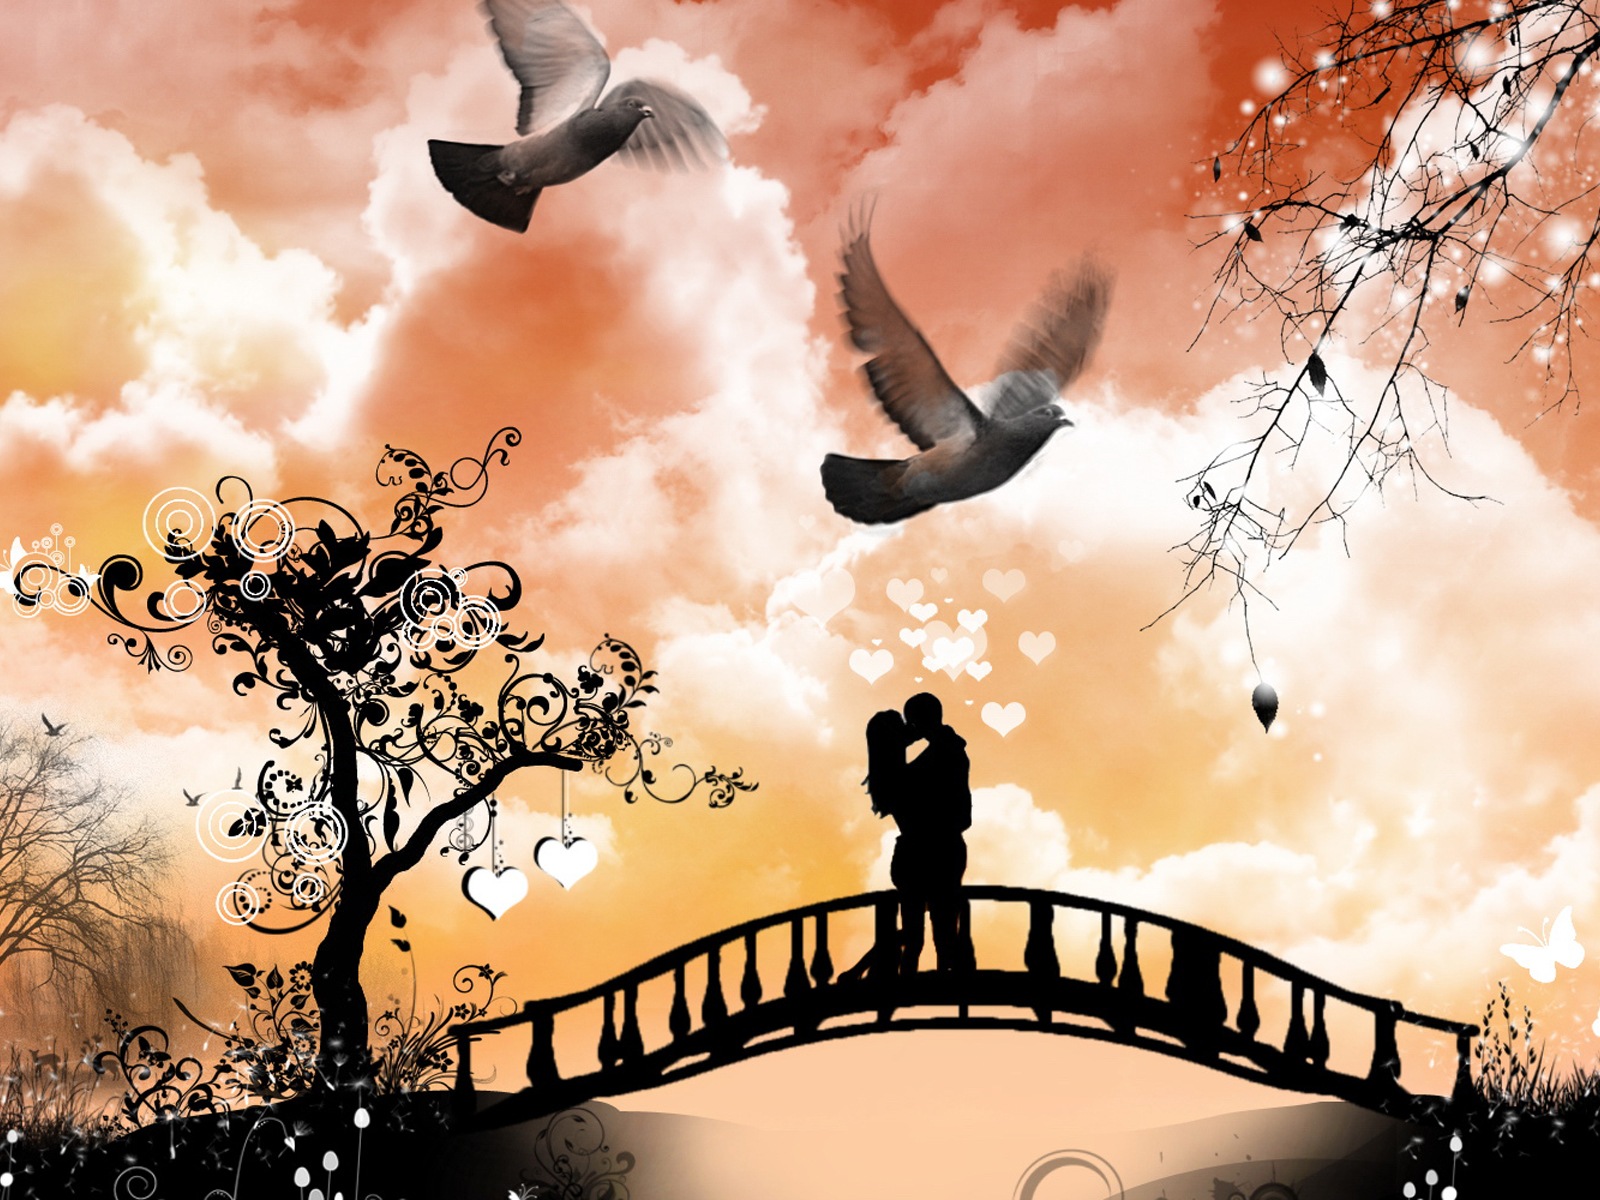 Warm and romantic Valentine's Day HD wallpapers #20 - 1600x1200